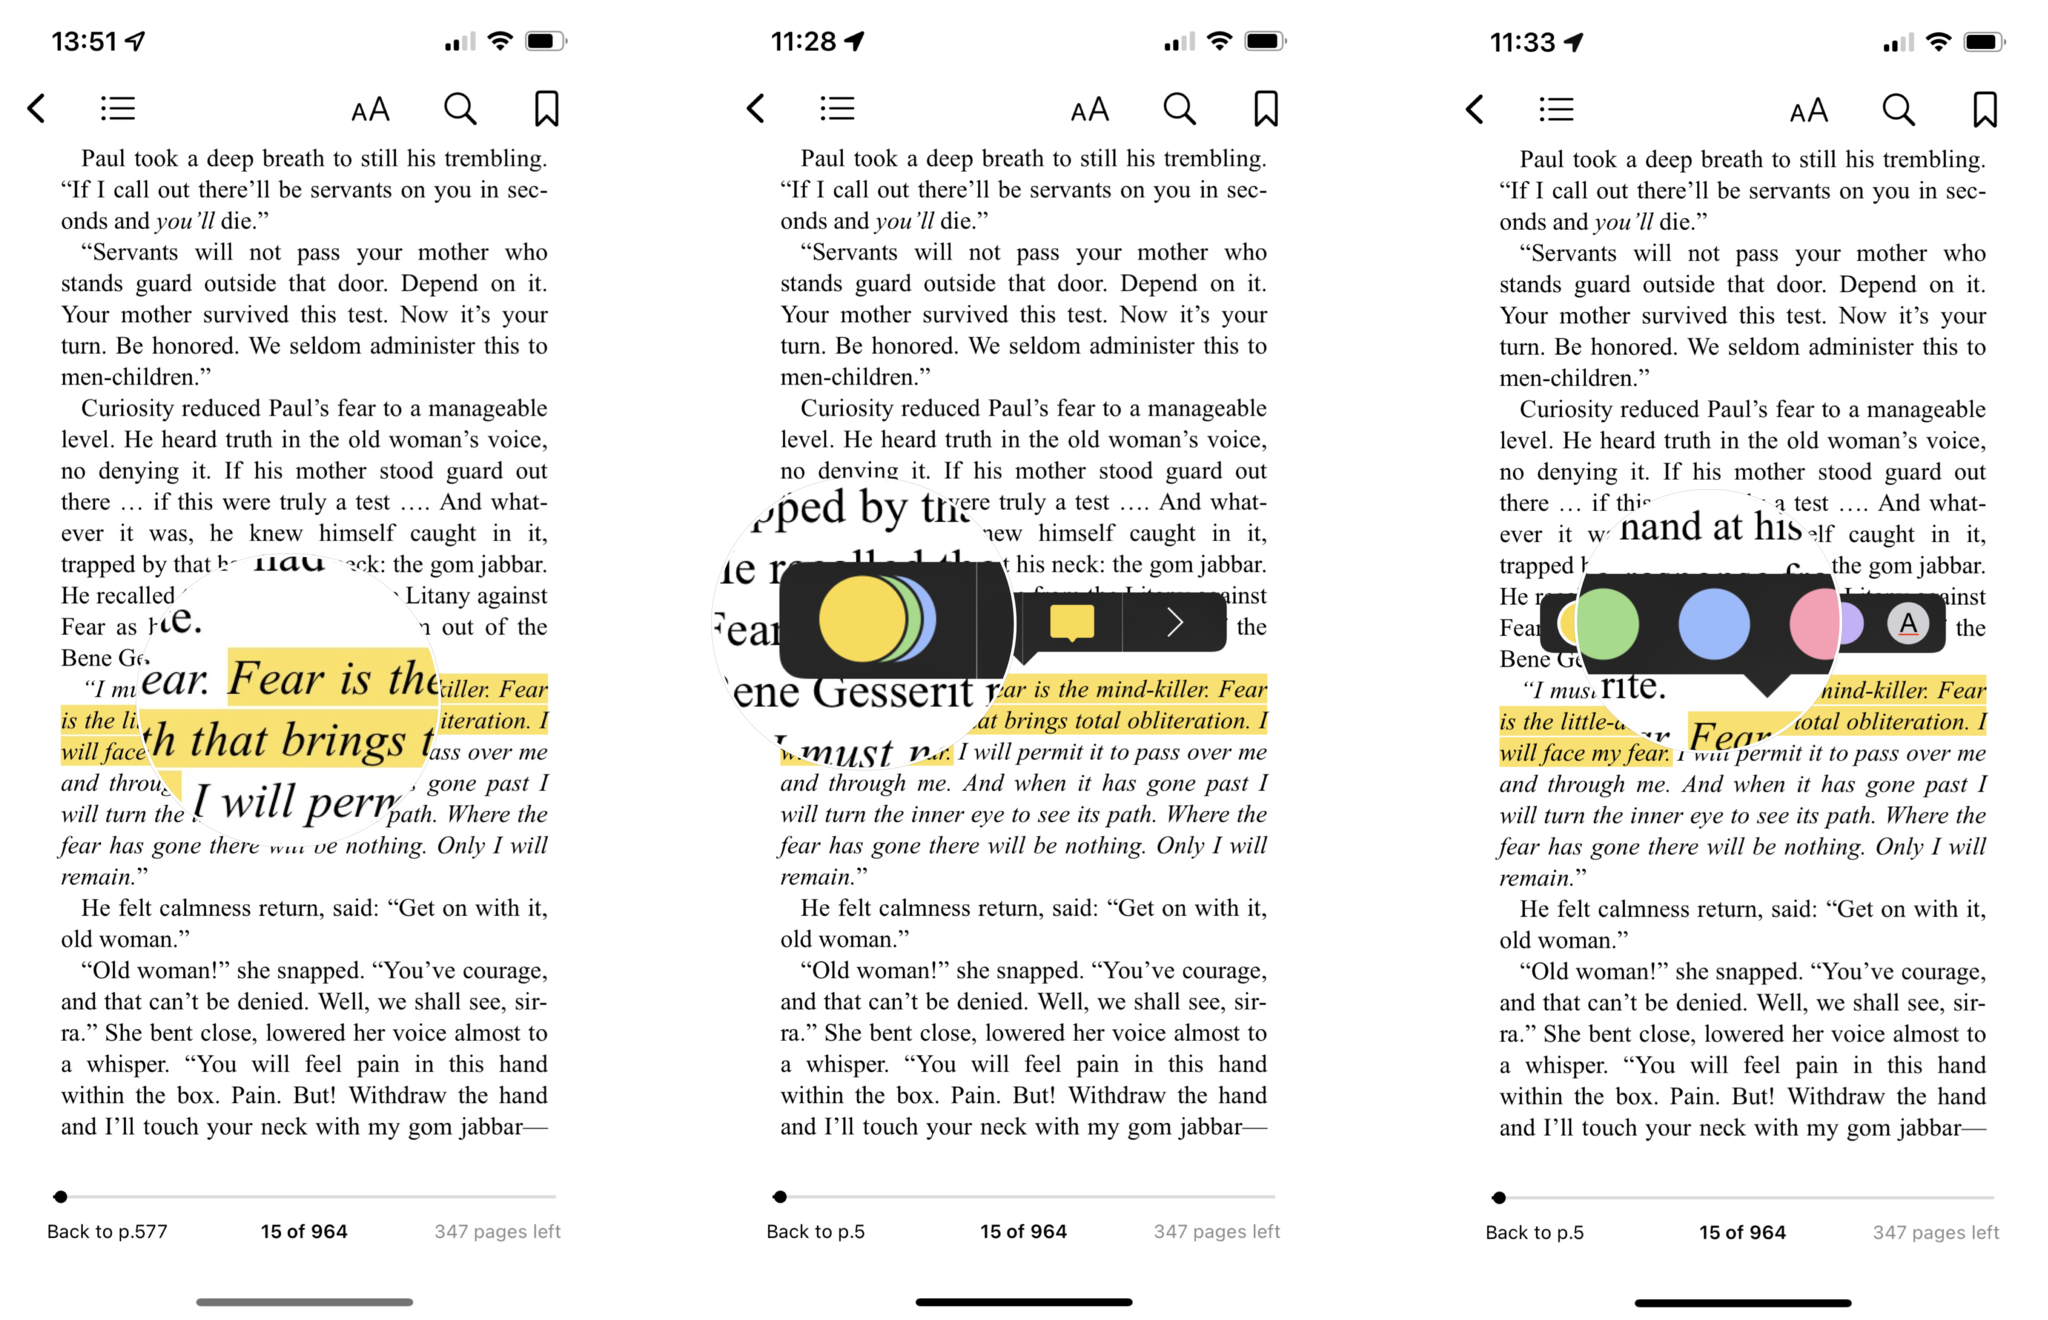 How to change the color of a highlight in Apple Books: Tap the highlighted text, tap the coloured circles, tap a color